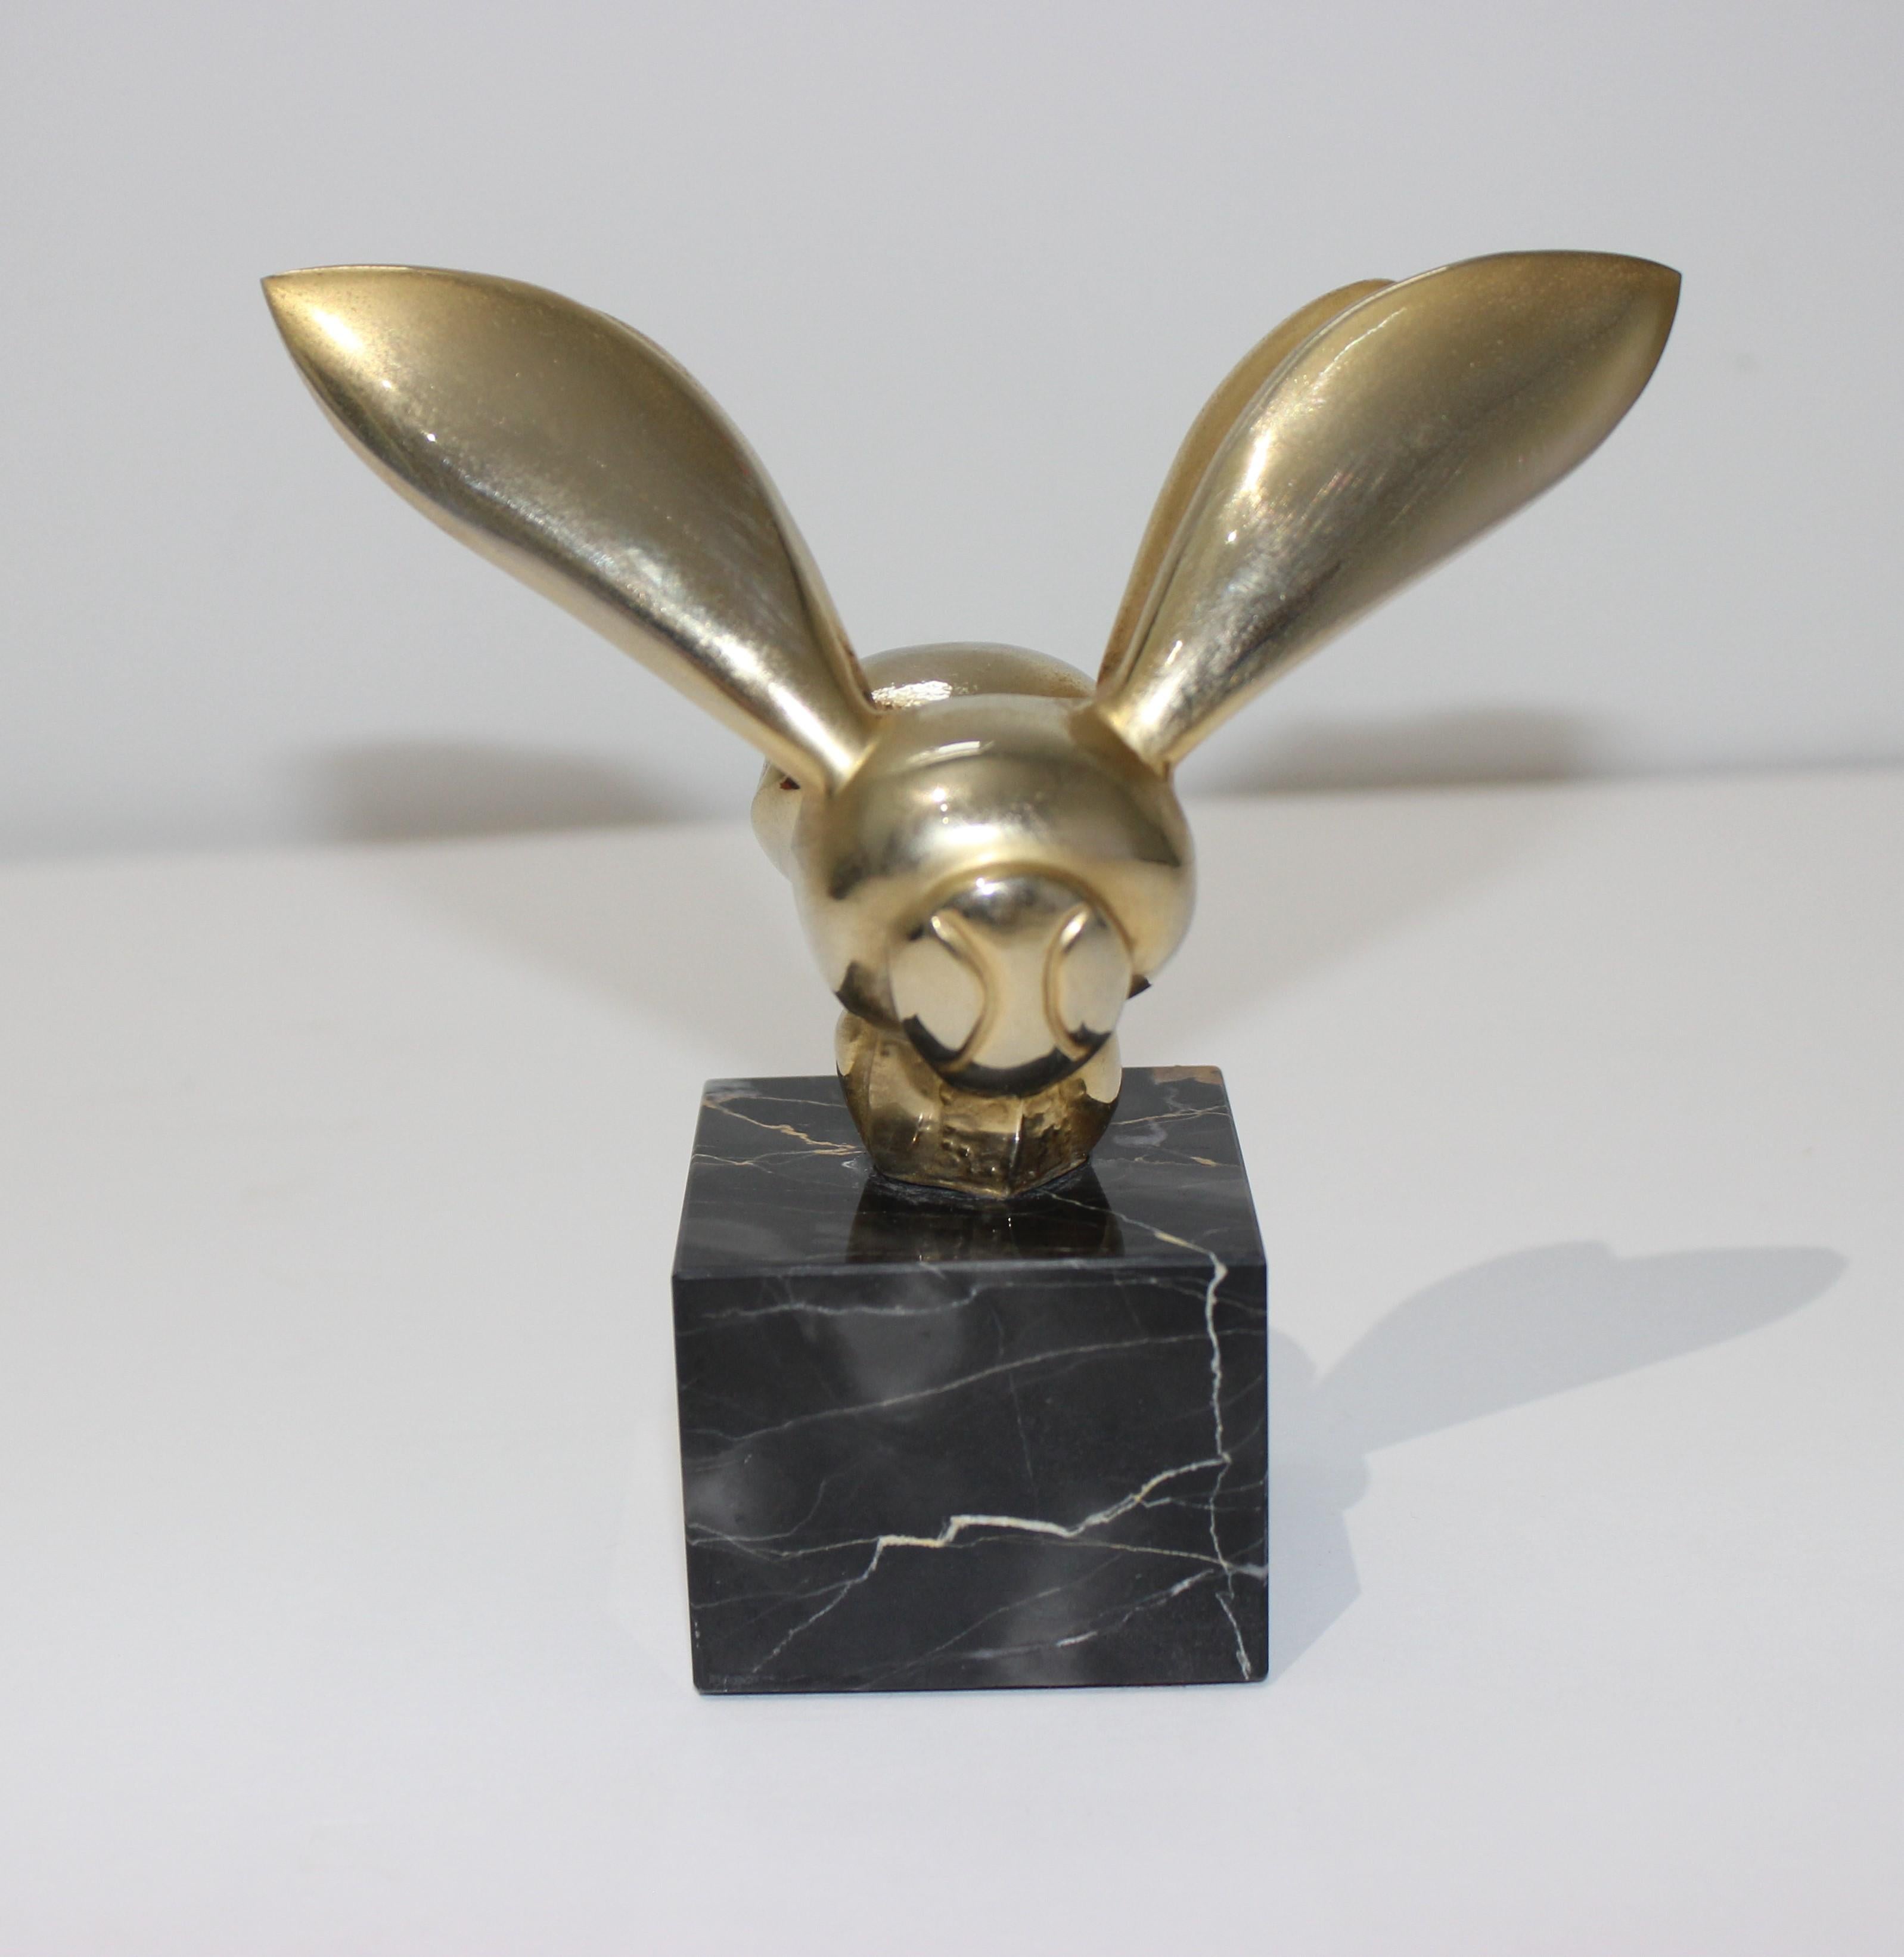 This stylish bumble bee sculpture is an authorized museum replica by Alva Studios and was produced in the late 1970s for the Philadelphia Museum of Art. 

The original bumble bee sculpture by G. Lachaise is in the Philadelphia Museum of Art.